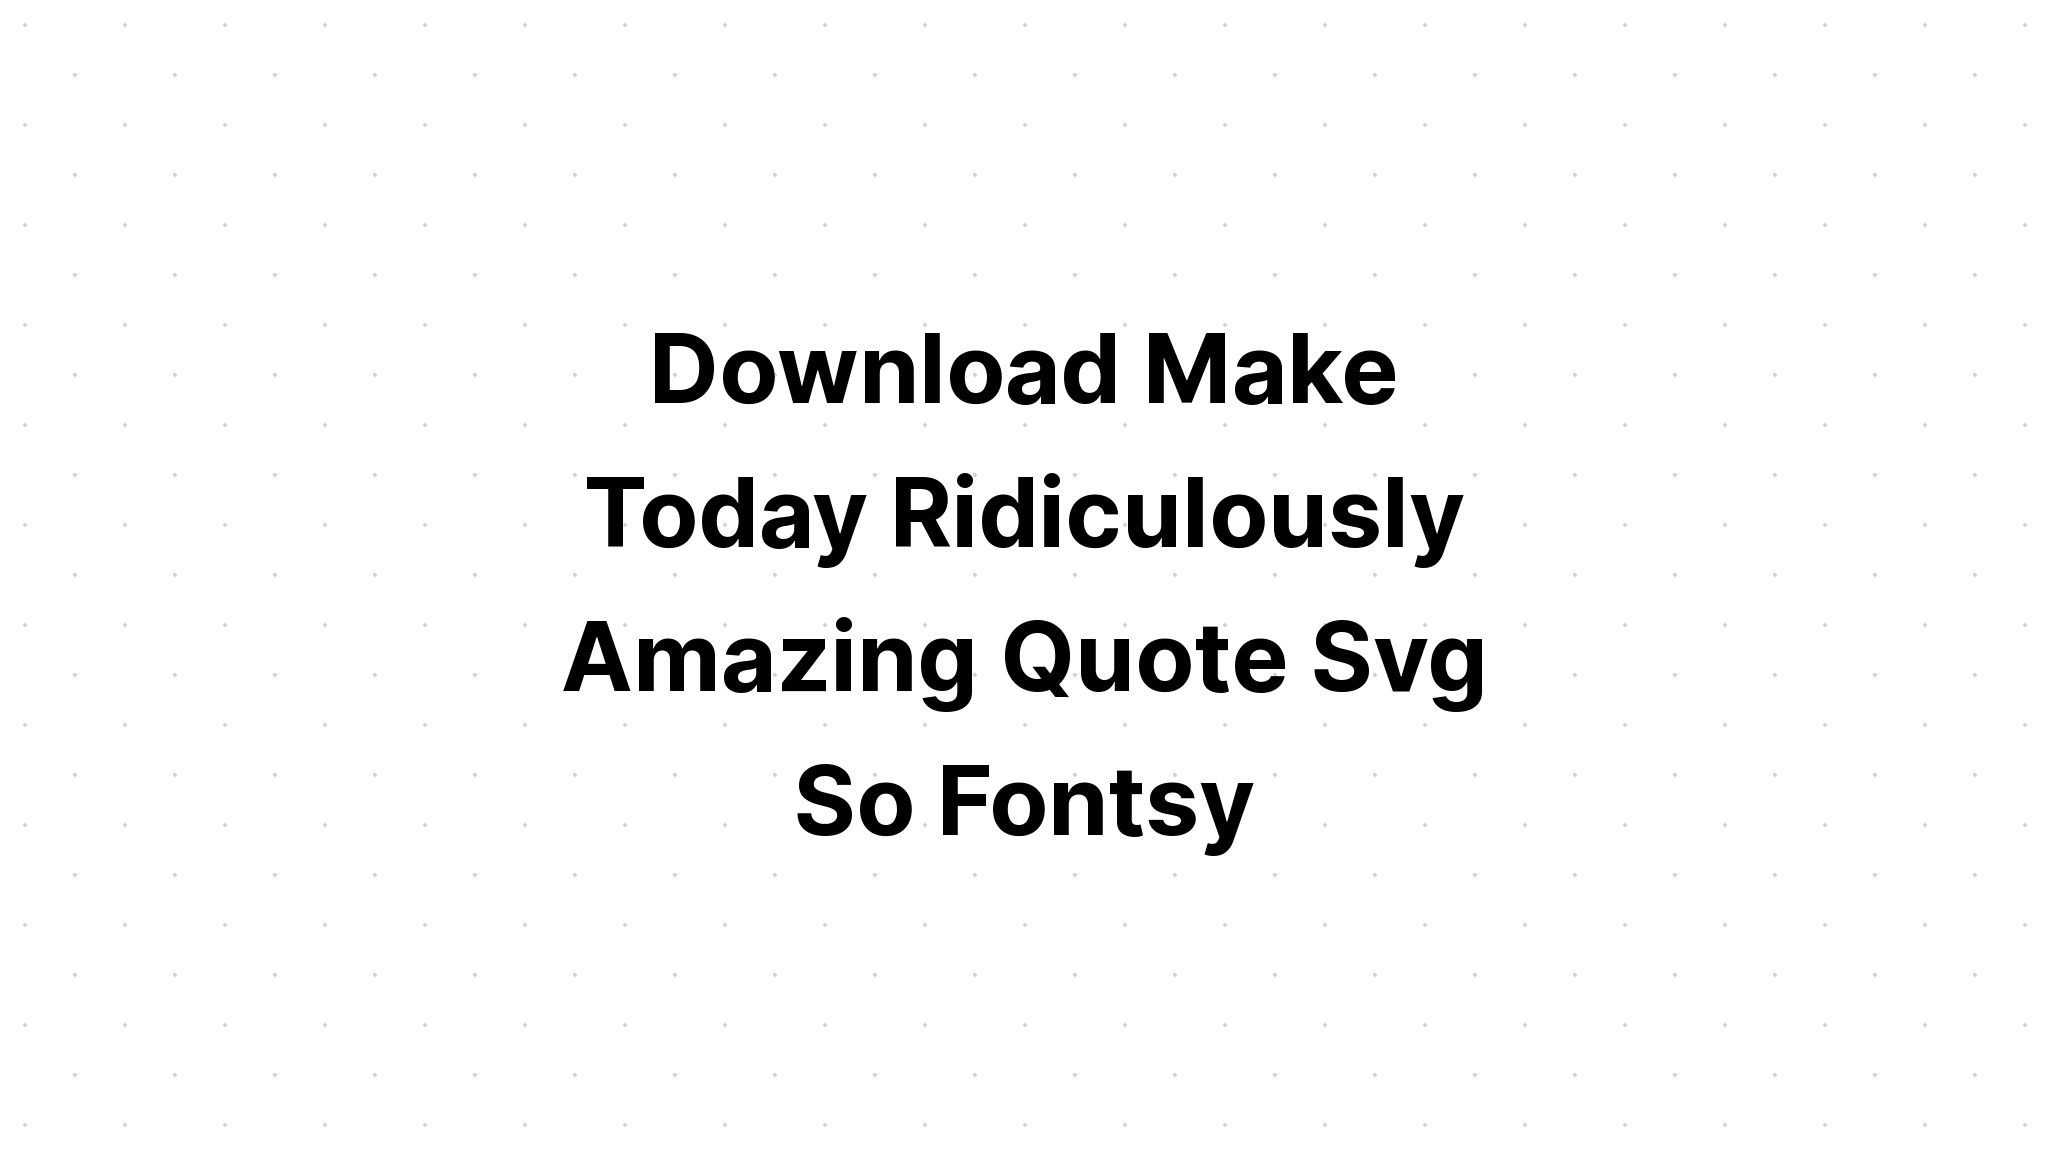 Download Make Today Ridiculously Amazing SVG File